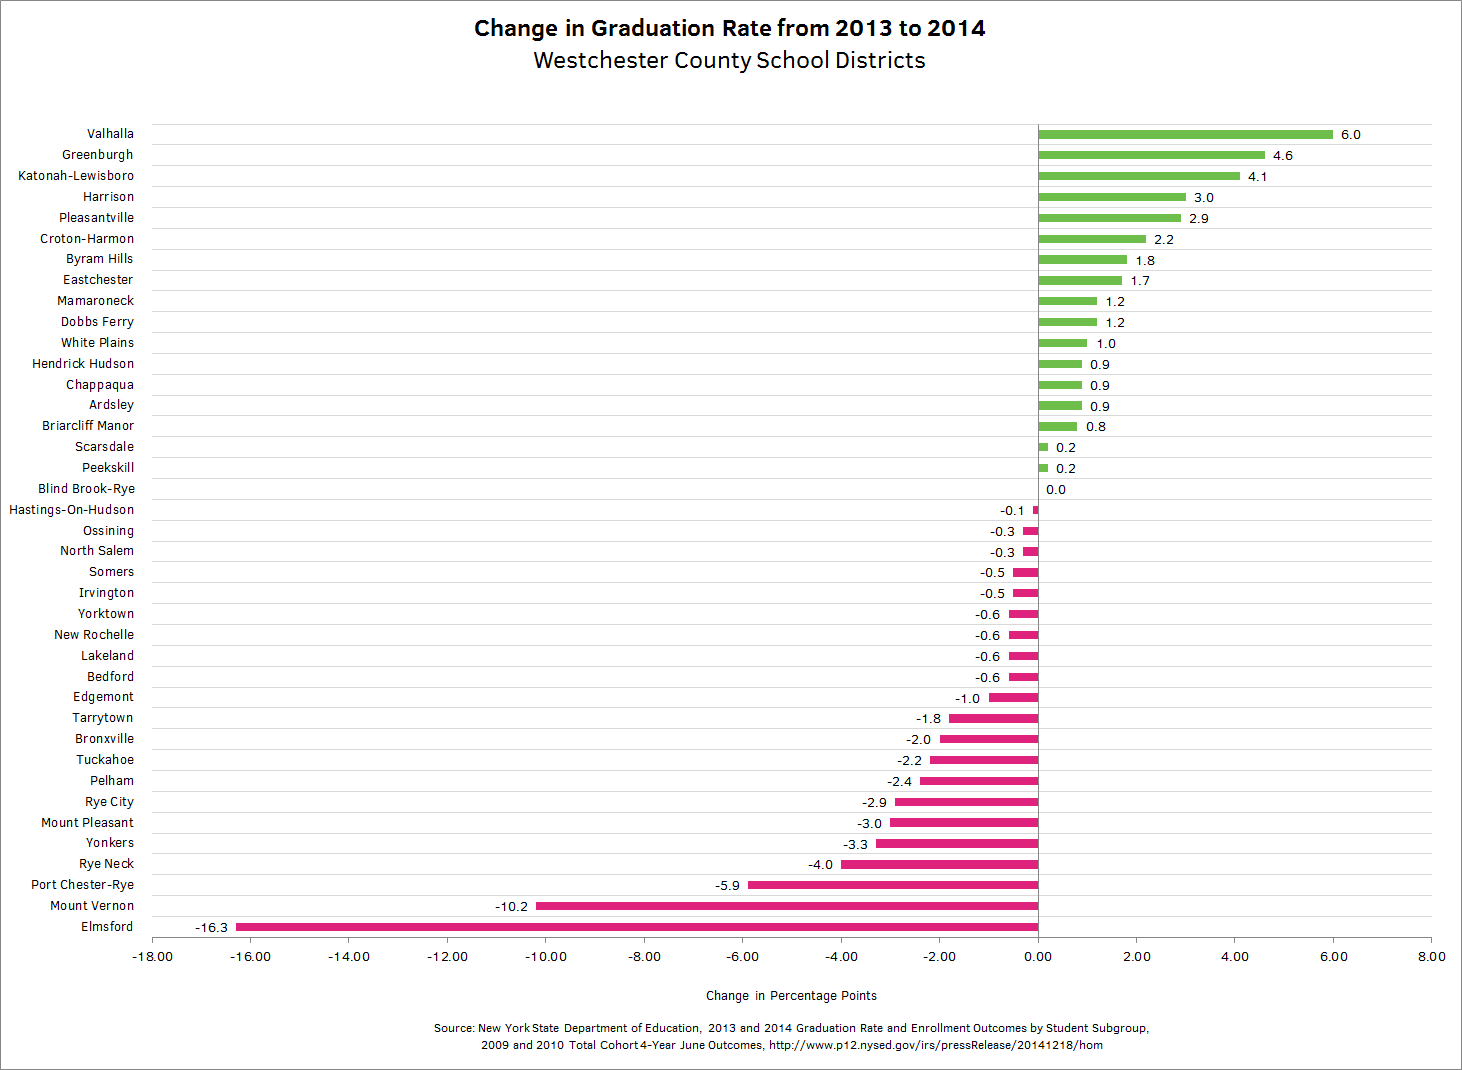 Change in Graduation Rate (2013 to 2014) for Westchester County School Districts